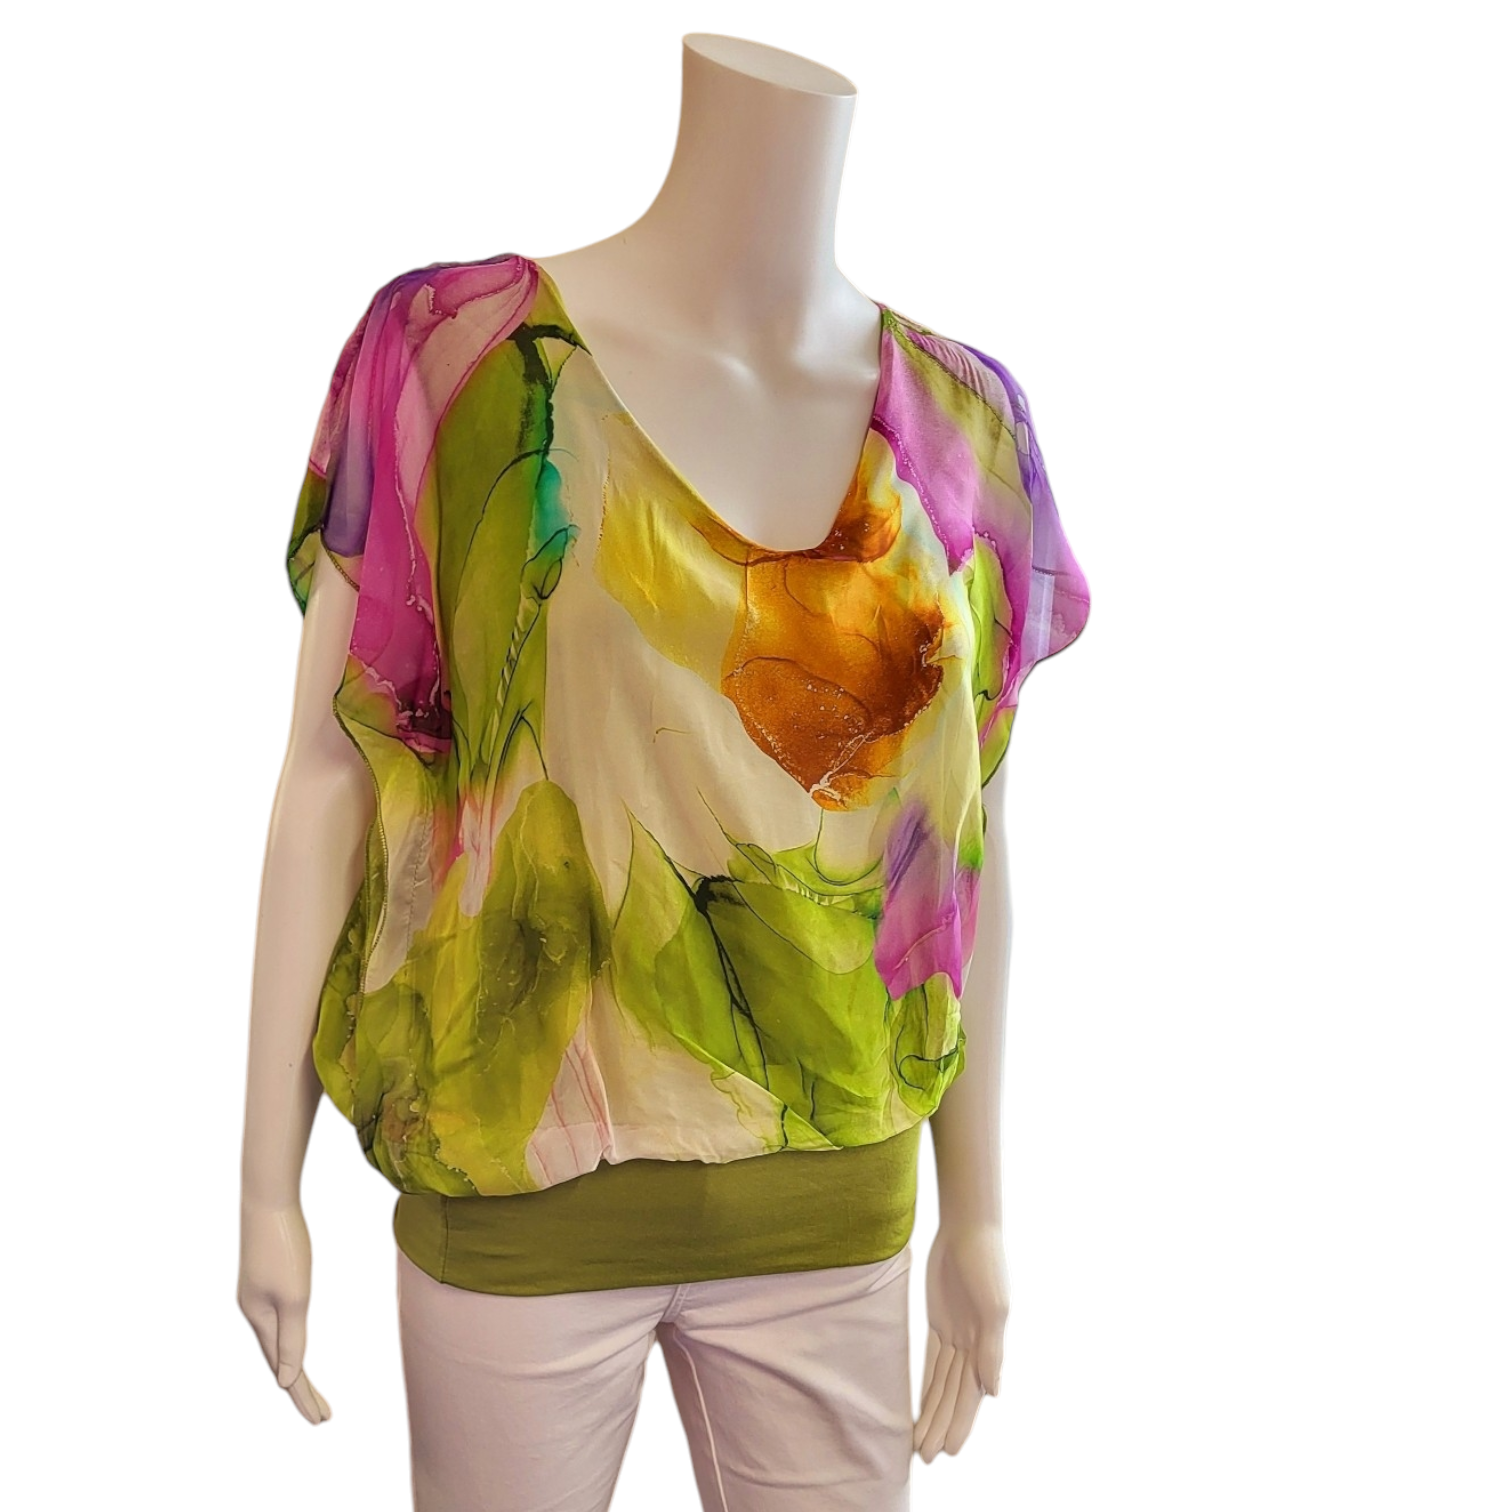 lime green, pale pink and cream coloured top in a colourful abstract design. top has short sleeves and v neck